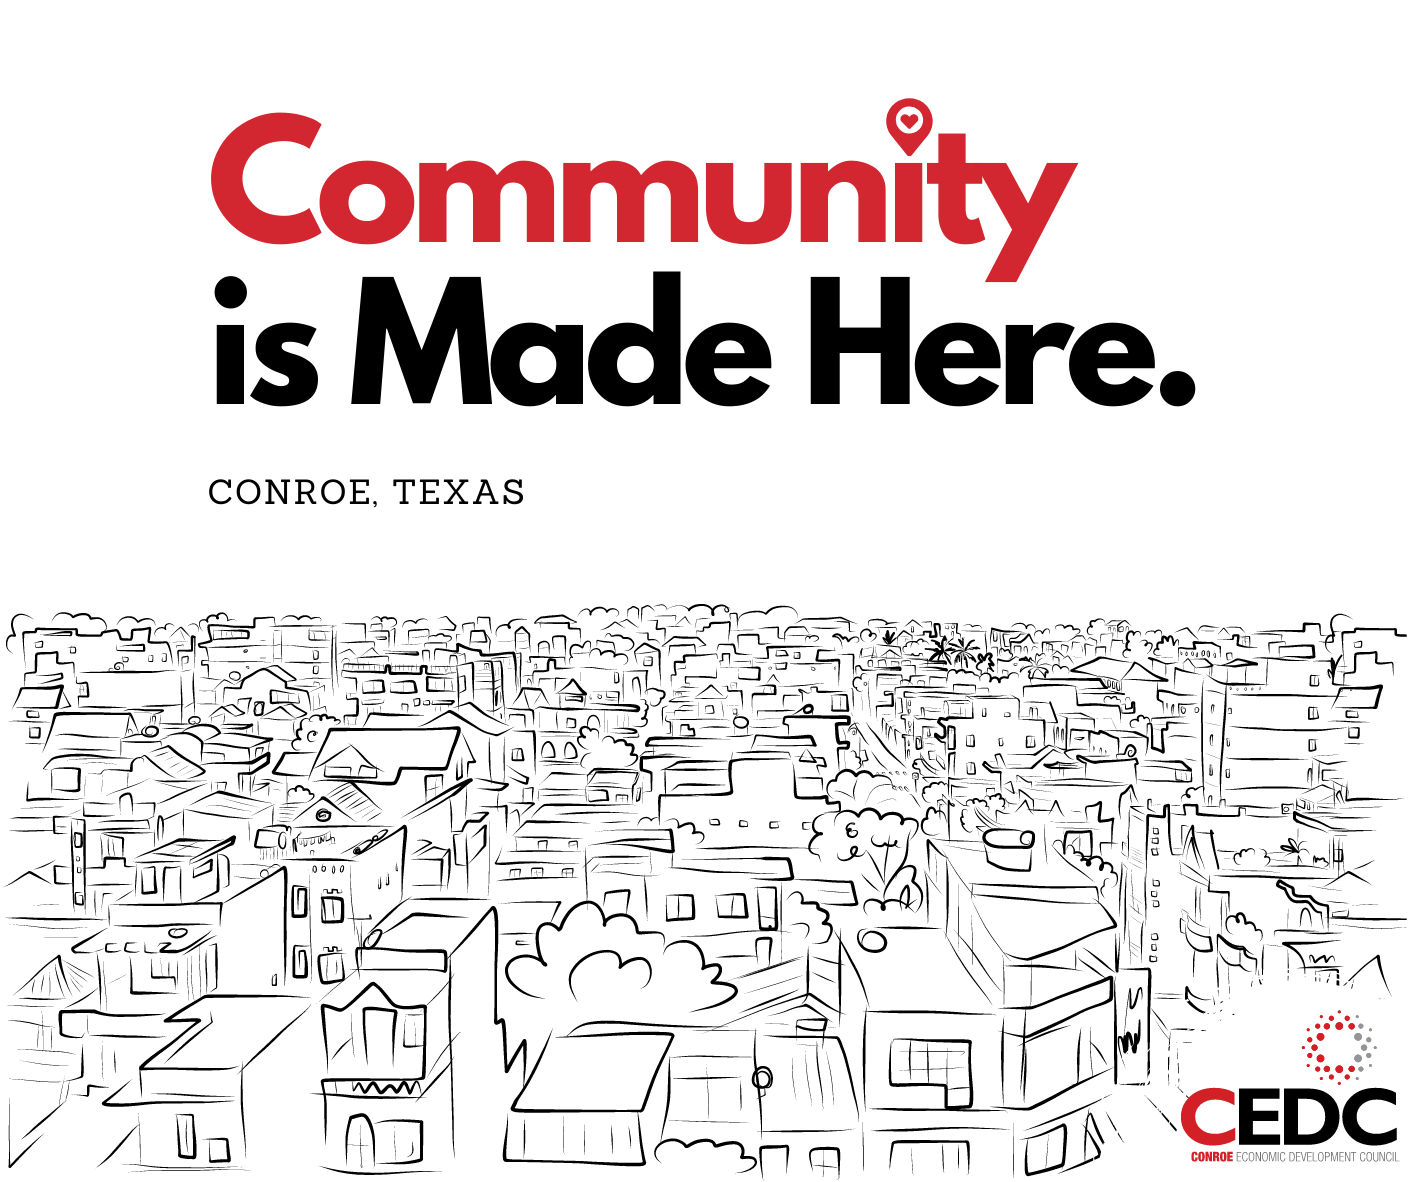 Community is Made Here Featuring Crown Cork & Seal and Mayor Pro Tem Raymond McDonald Photo